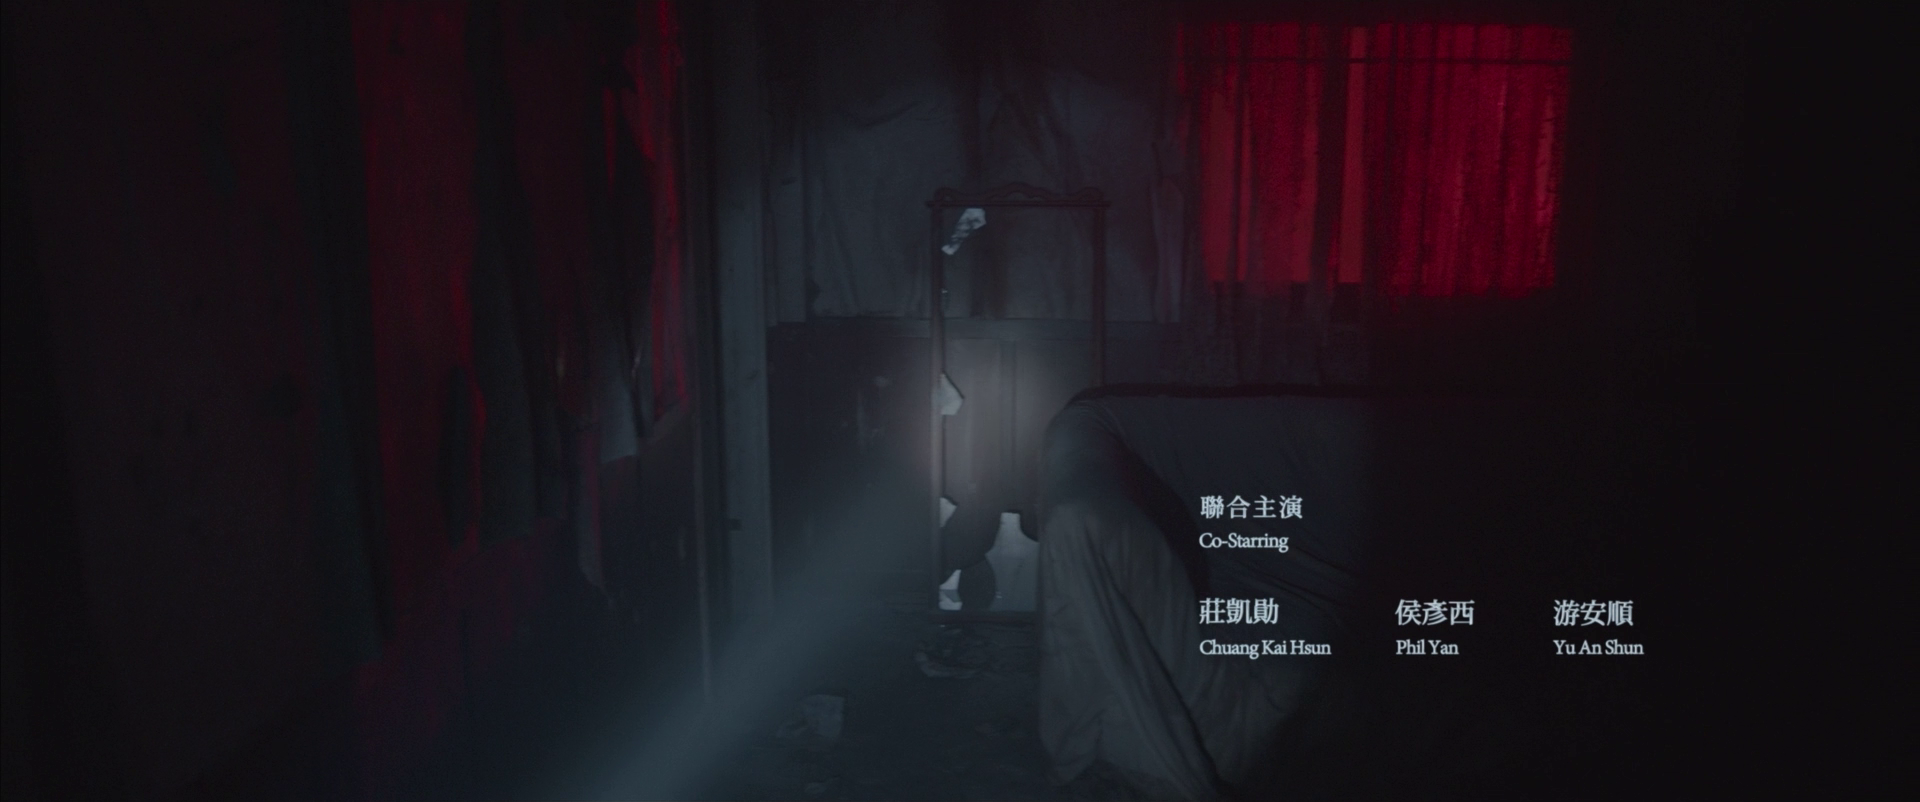 µķ The.Tenants.Downstairs.2016.CHINESE.1080p.BluRay.x264-WiKi 10.98GB-3.png